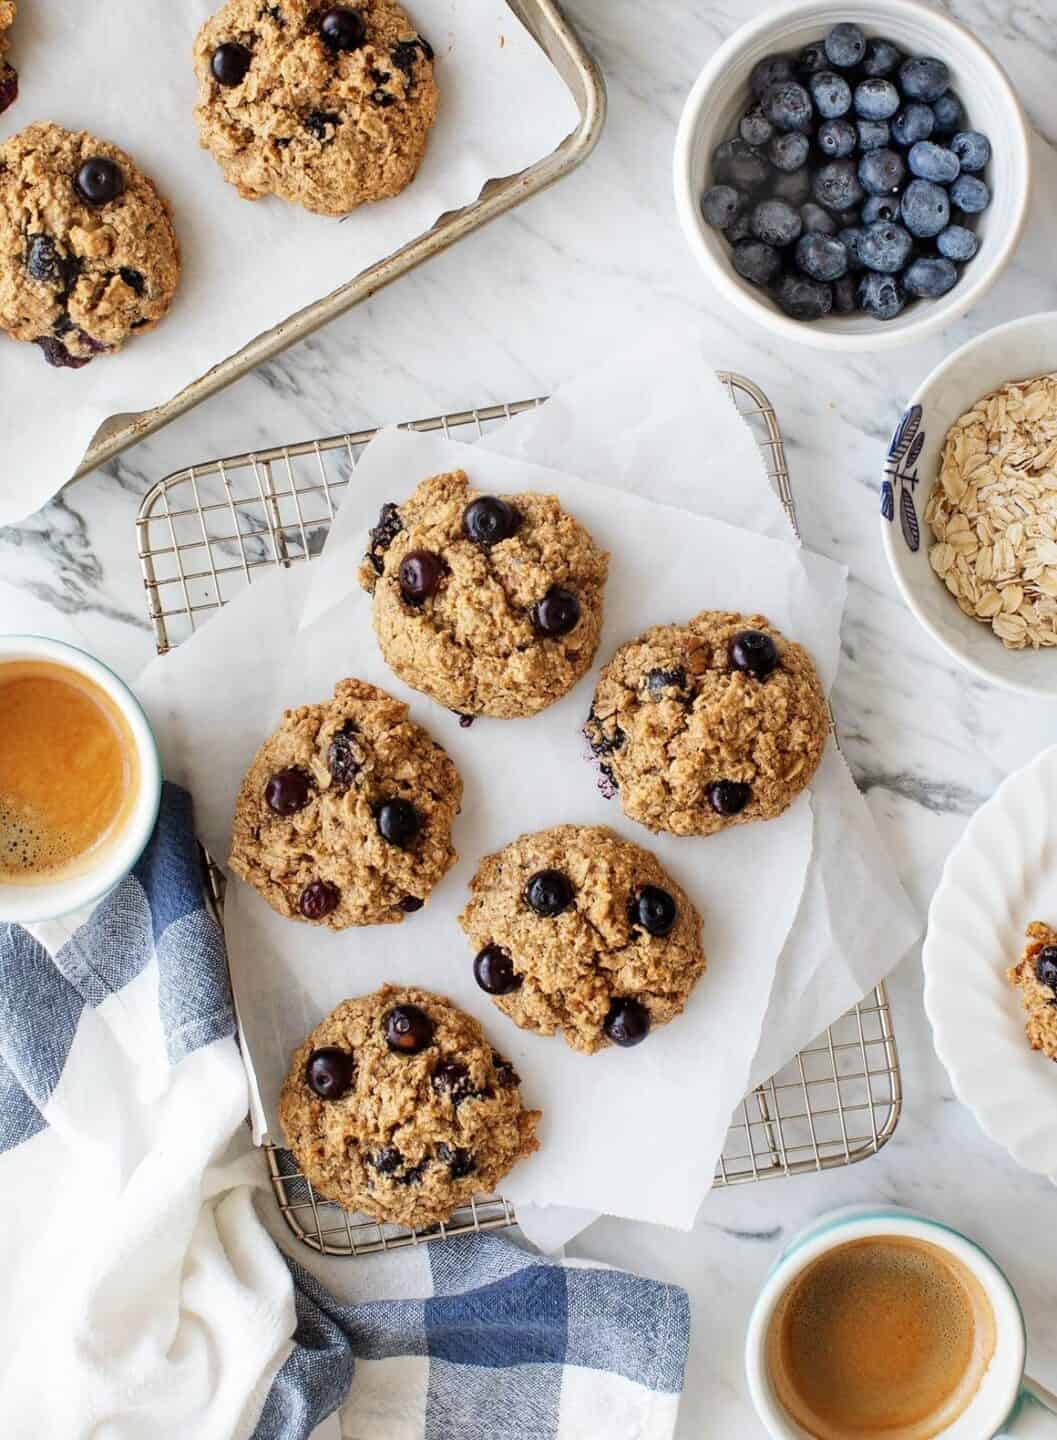 These oatmeal breakfast cookies are sweet, nutty, and filled with wholesome ingredients like oats, nuts, and fruit.